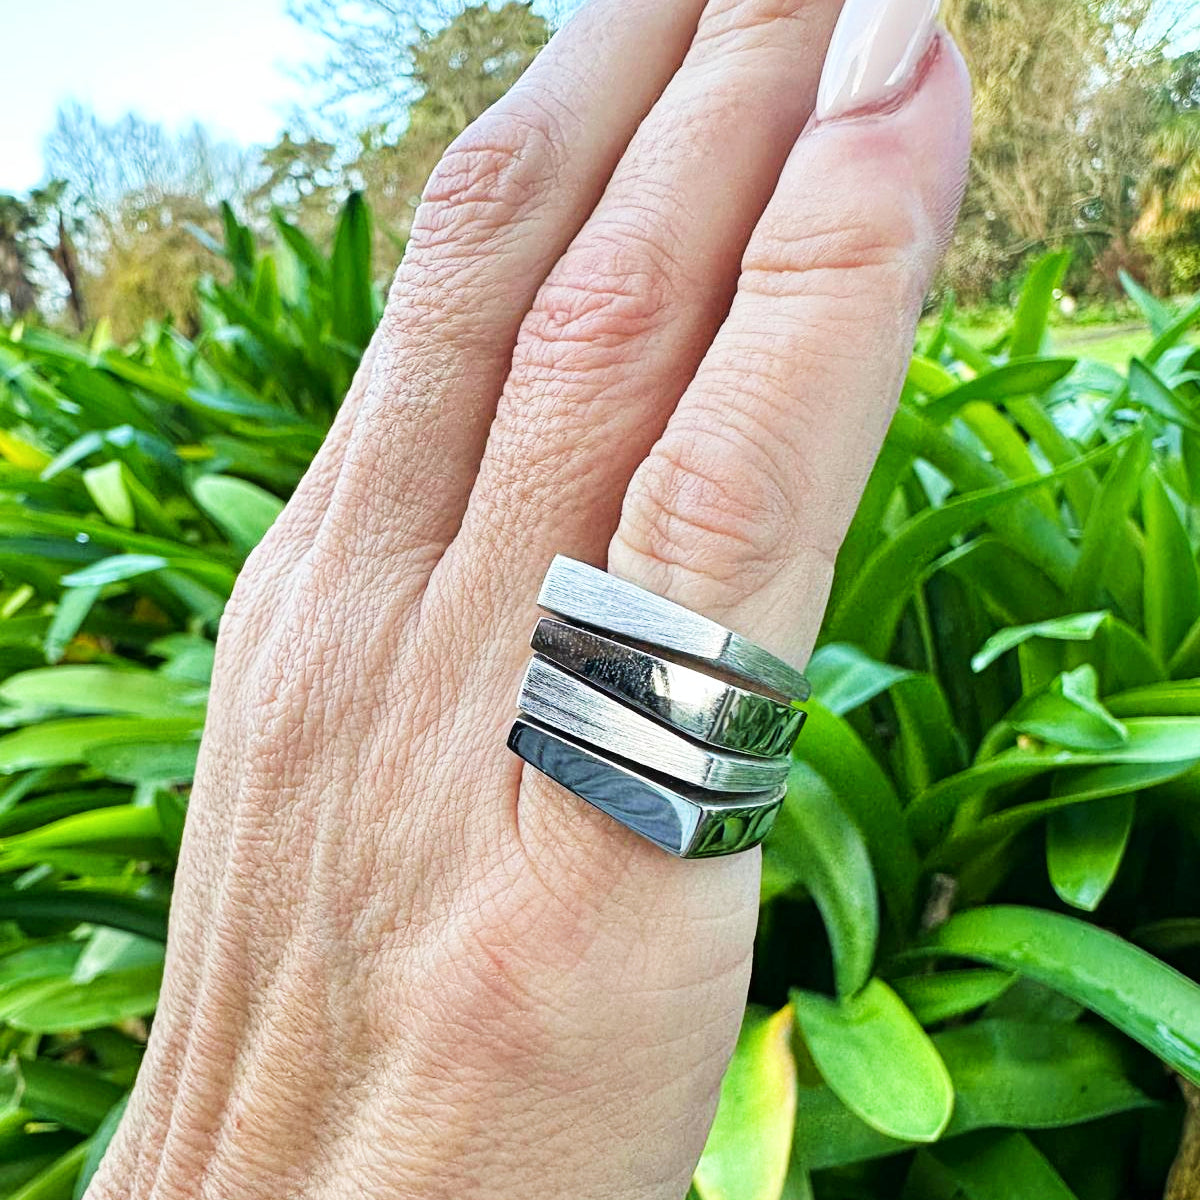 Charmed Ring. Joined stack of 925 Sterling Silver rings. Two rings are polished and two are brushed to give texture and contrast. Worldwide shipping. Affordable luxury jewellery by Bellagio & Co.